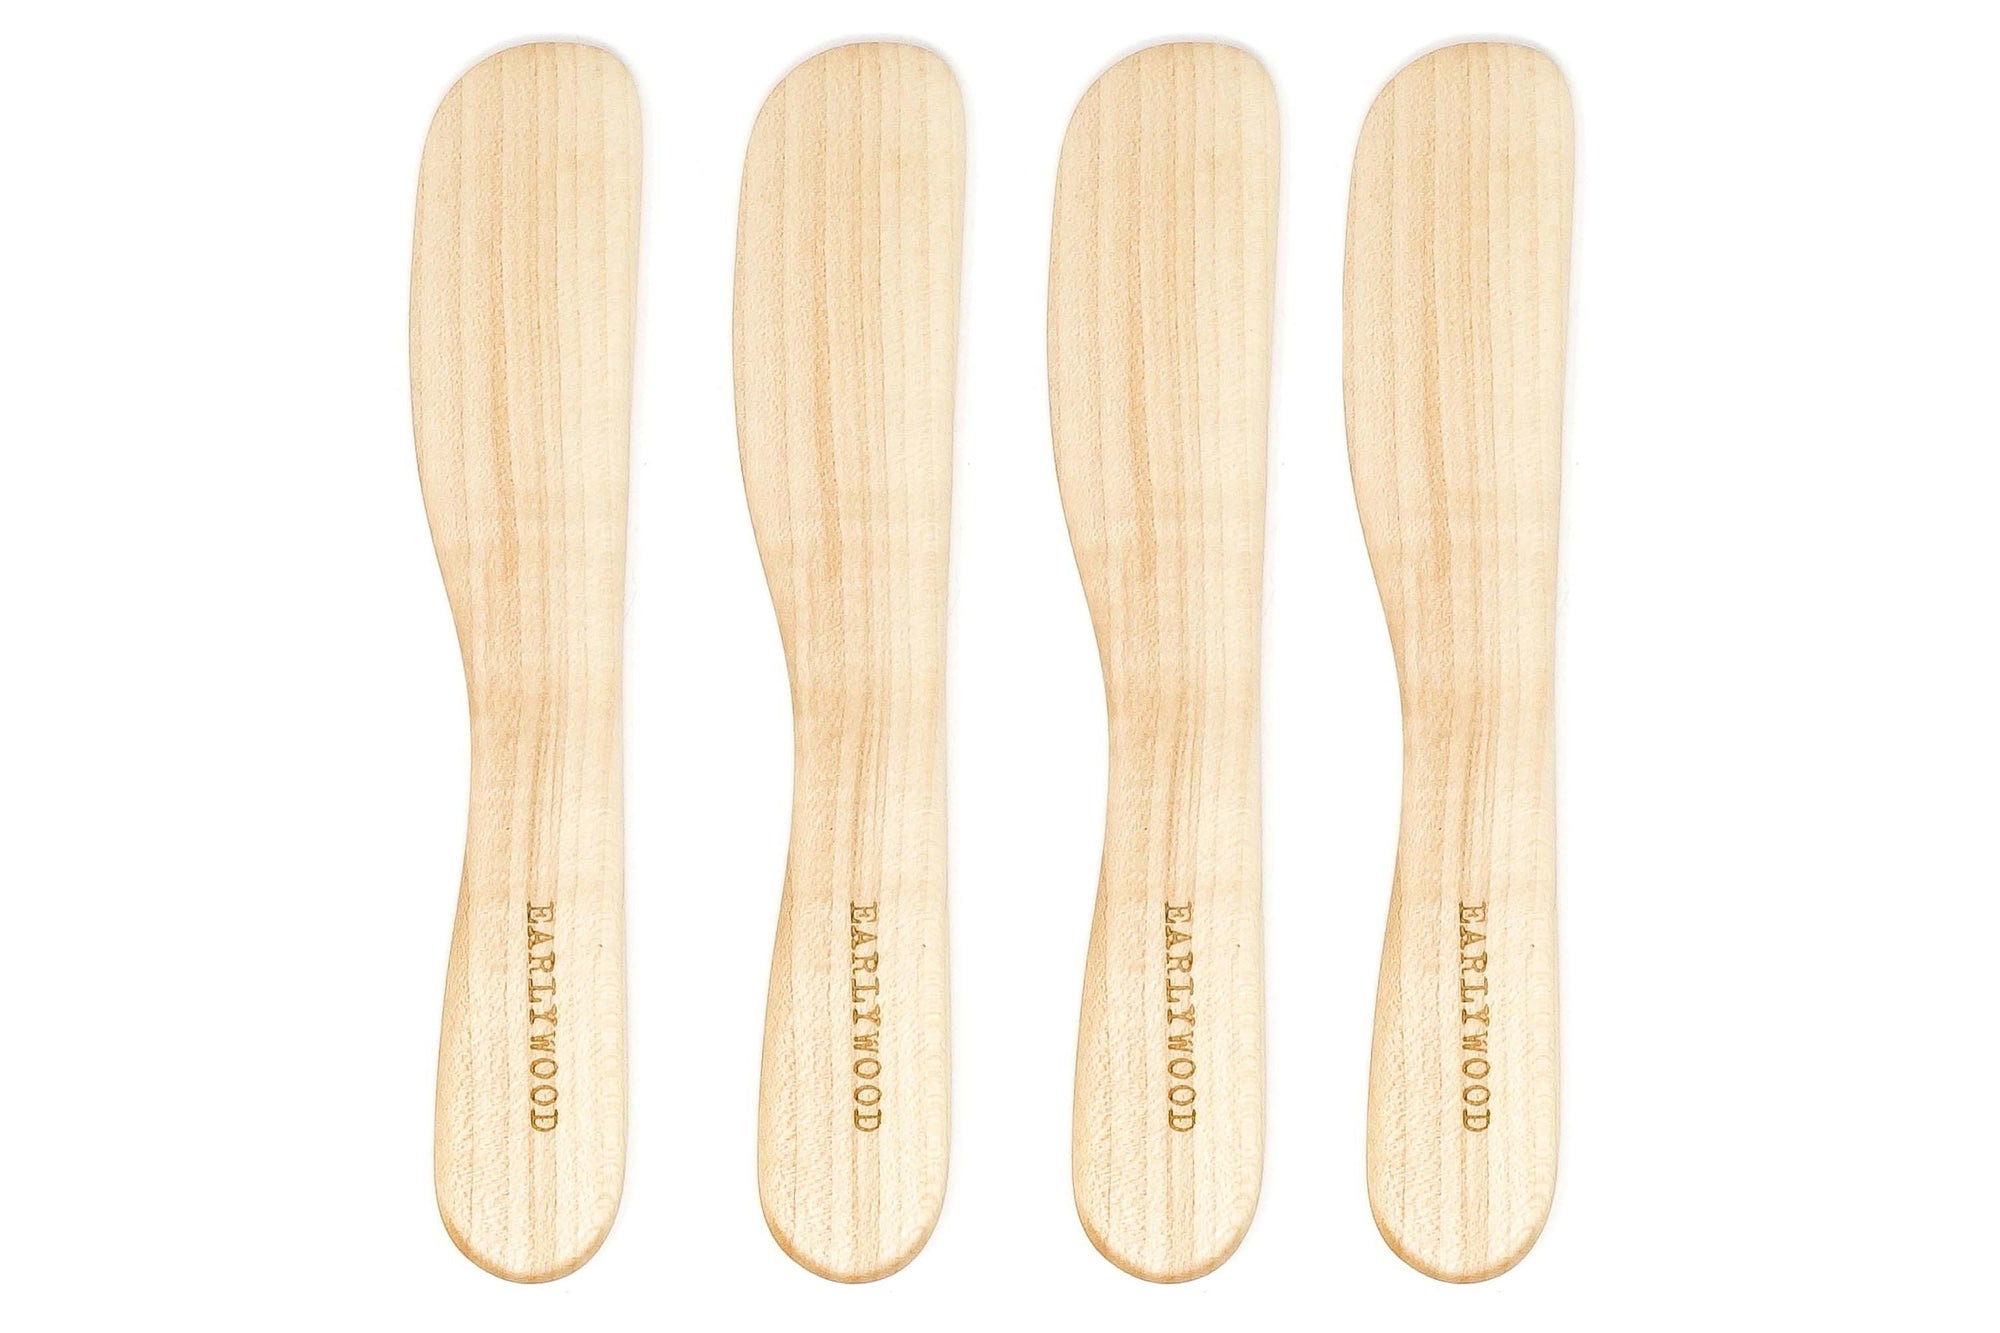 4 piece hard maple butter spreader set -Earlywood